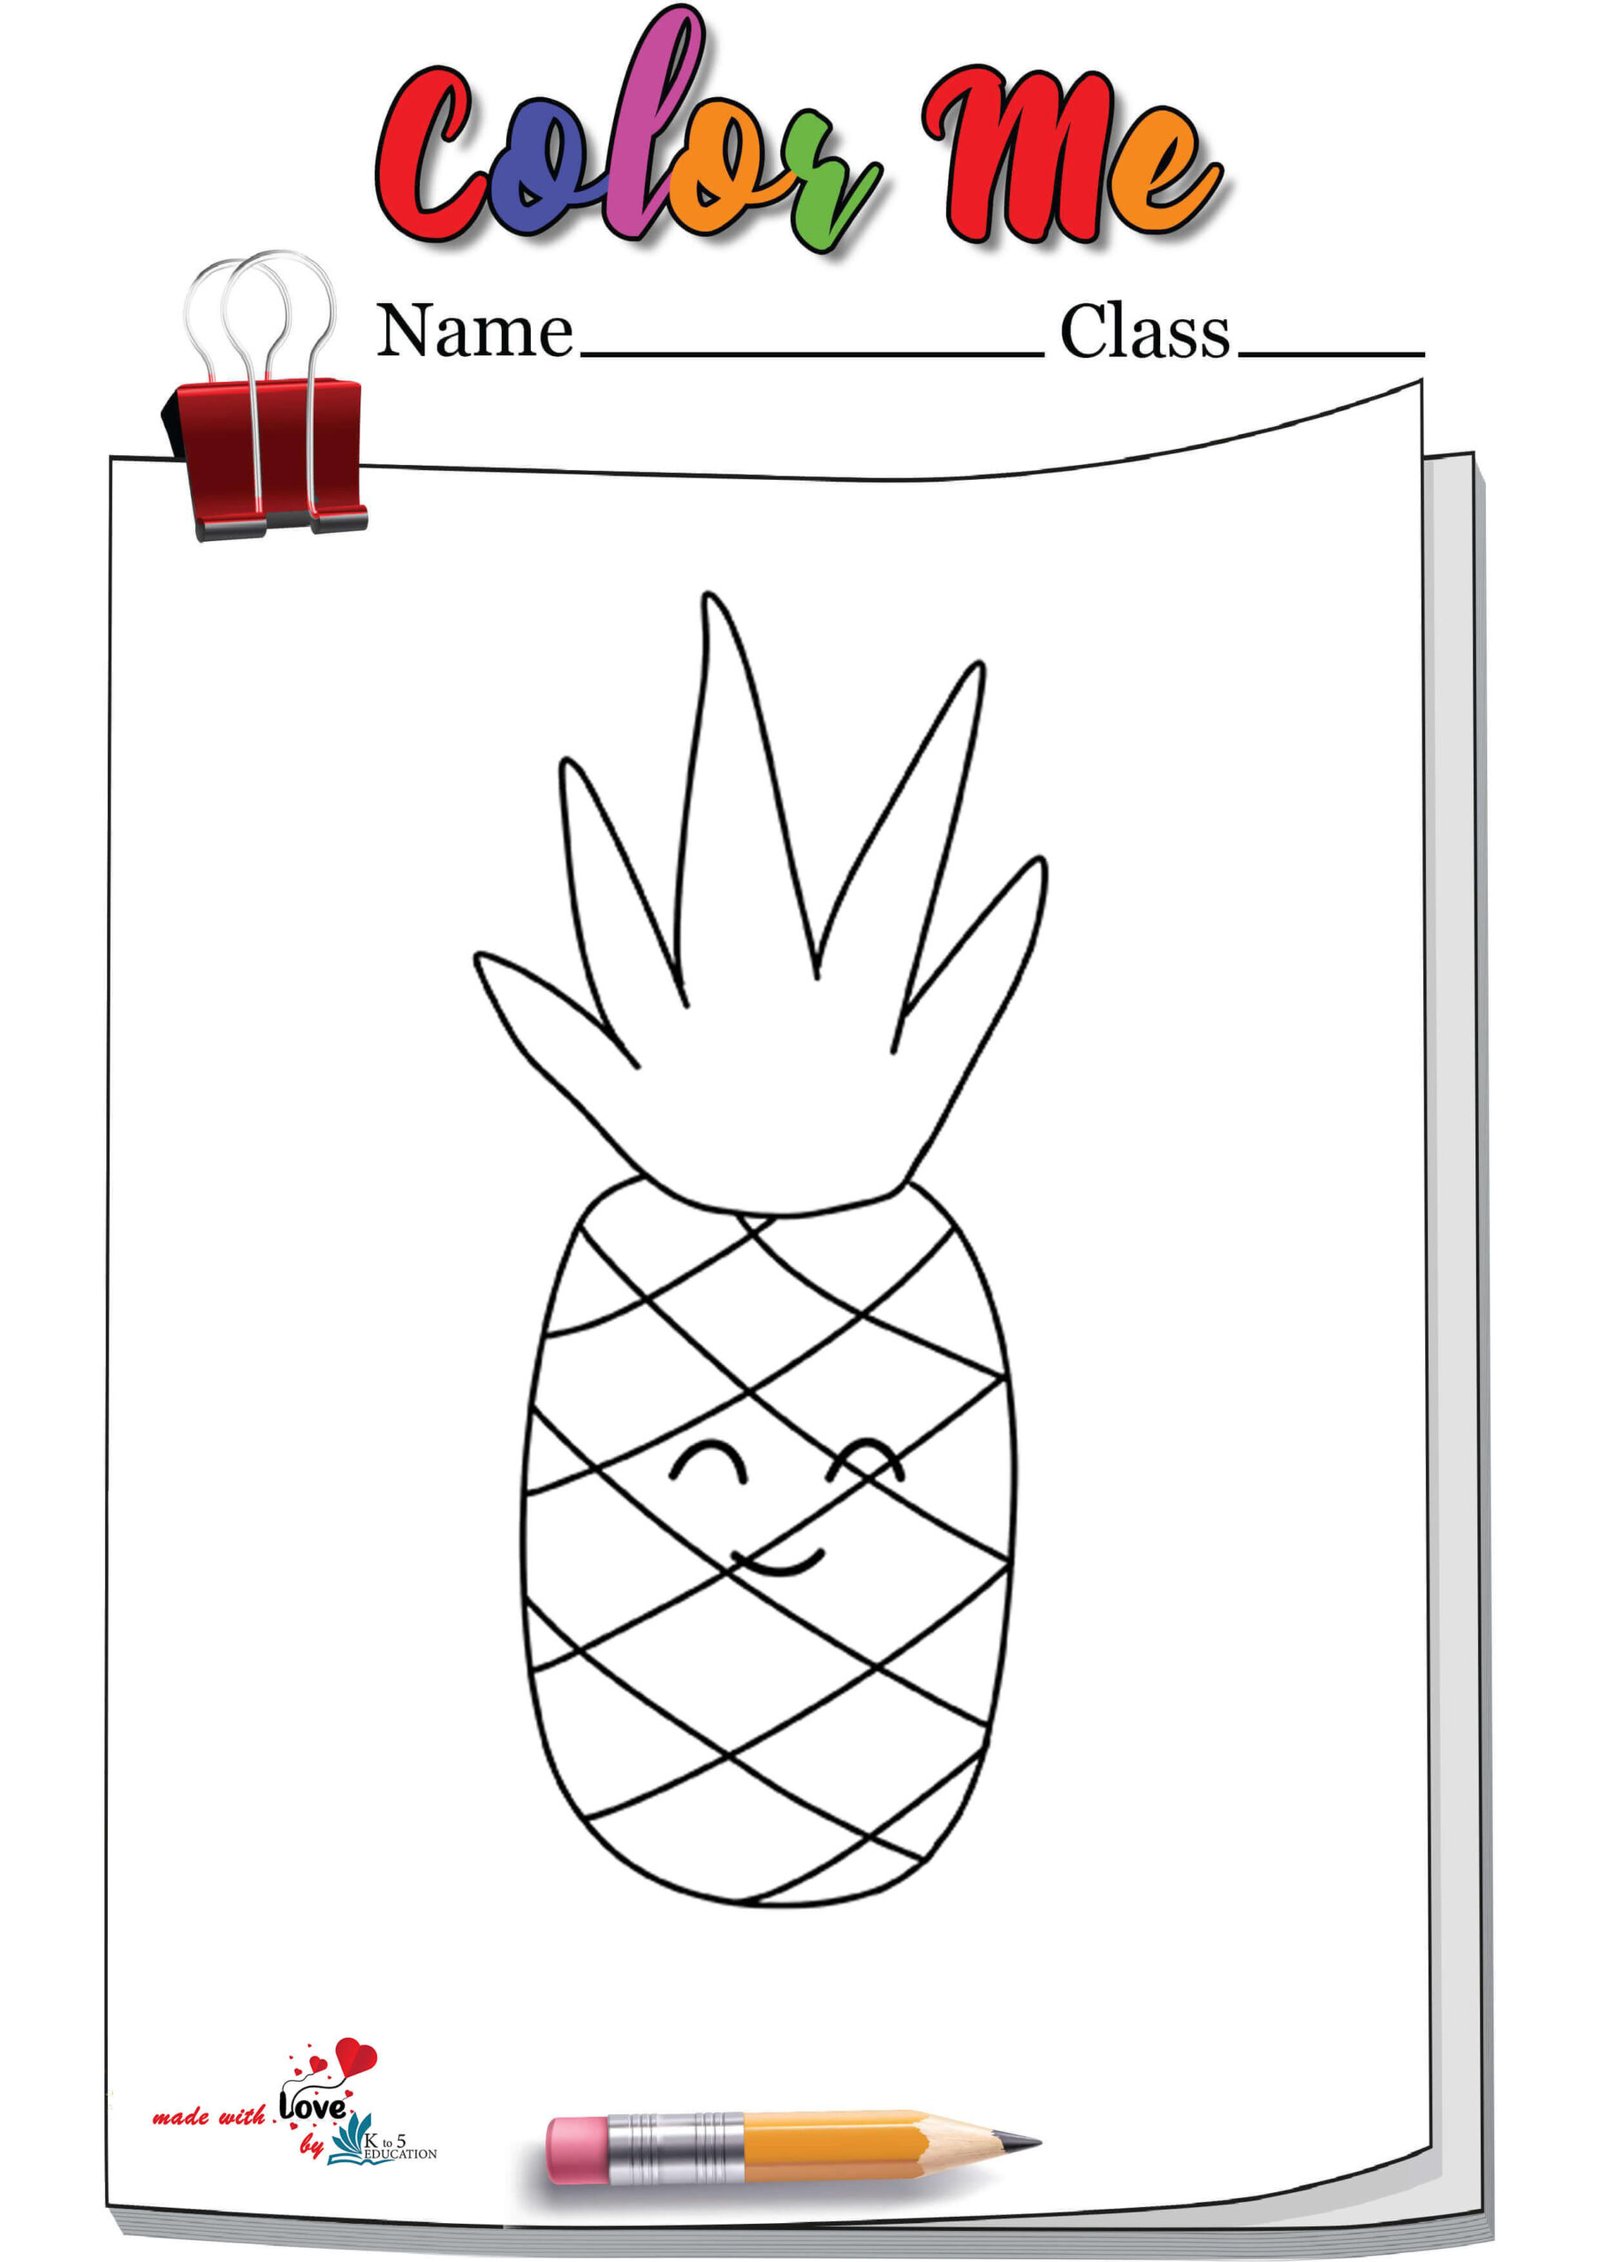 Pineapple Fruit Coloring Page